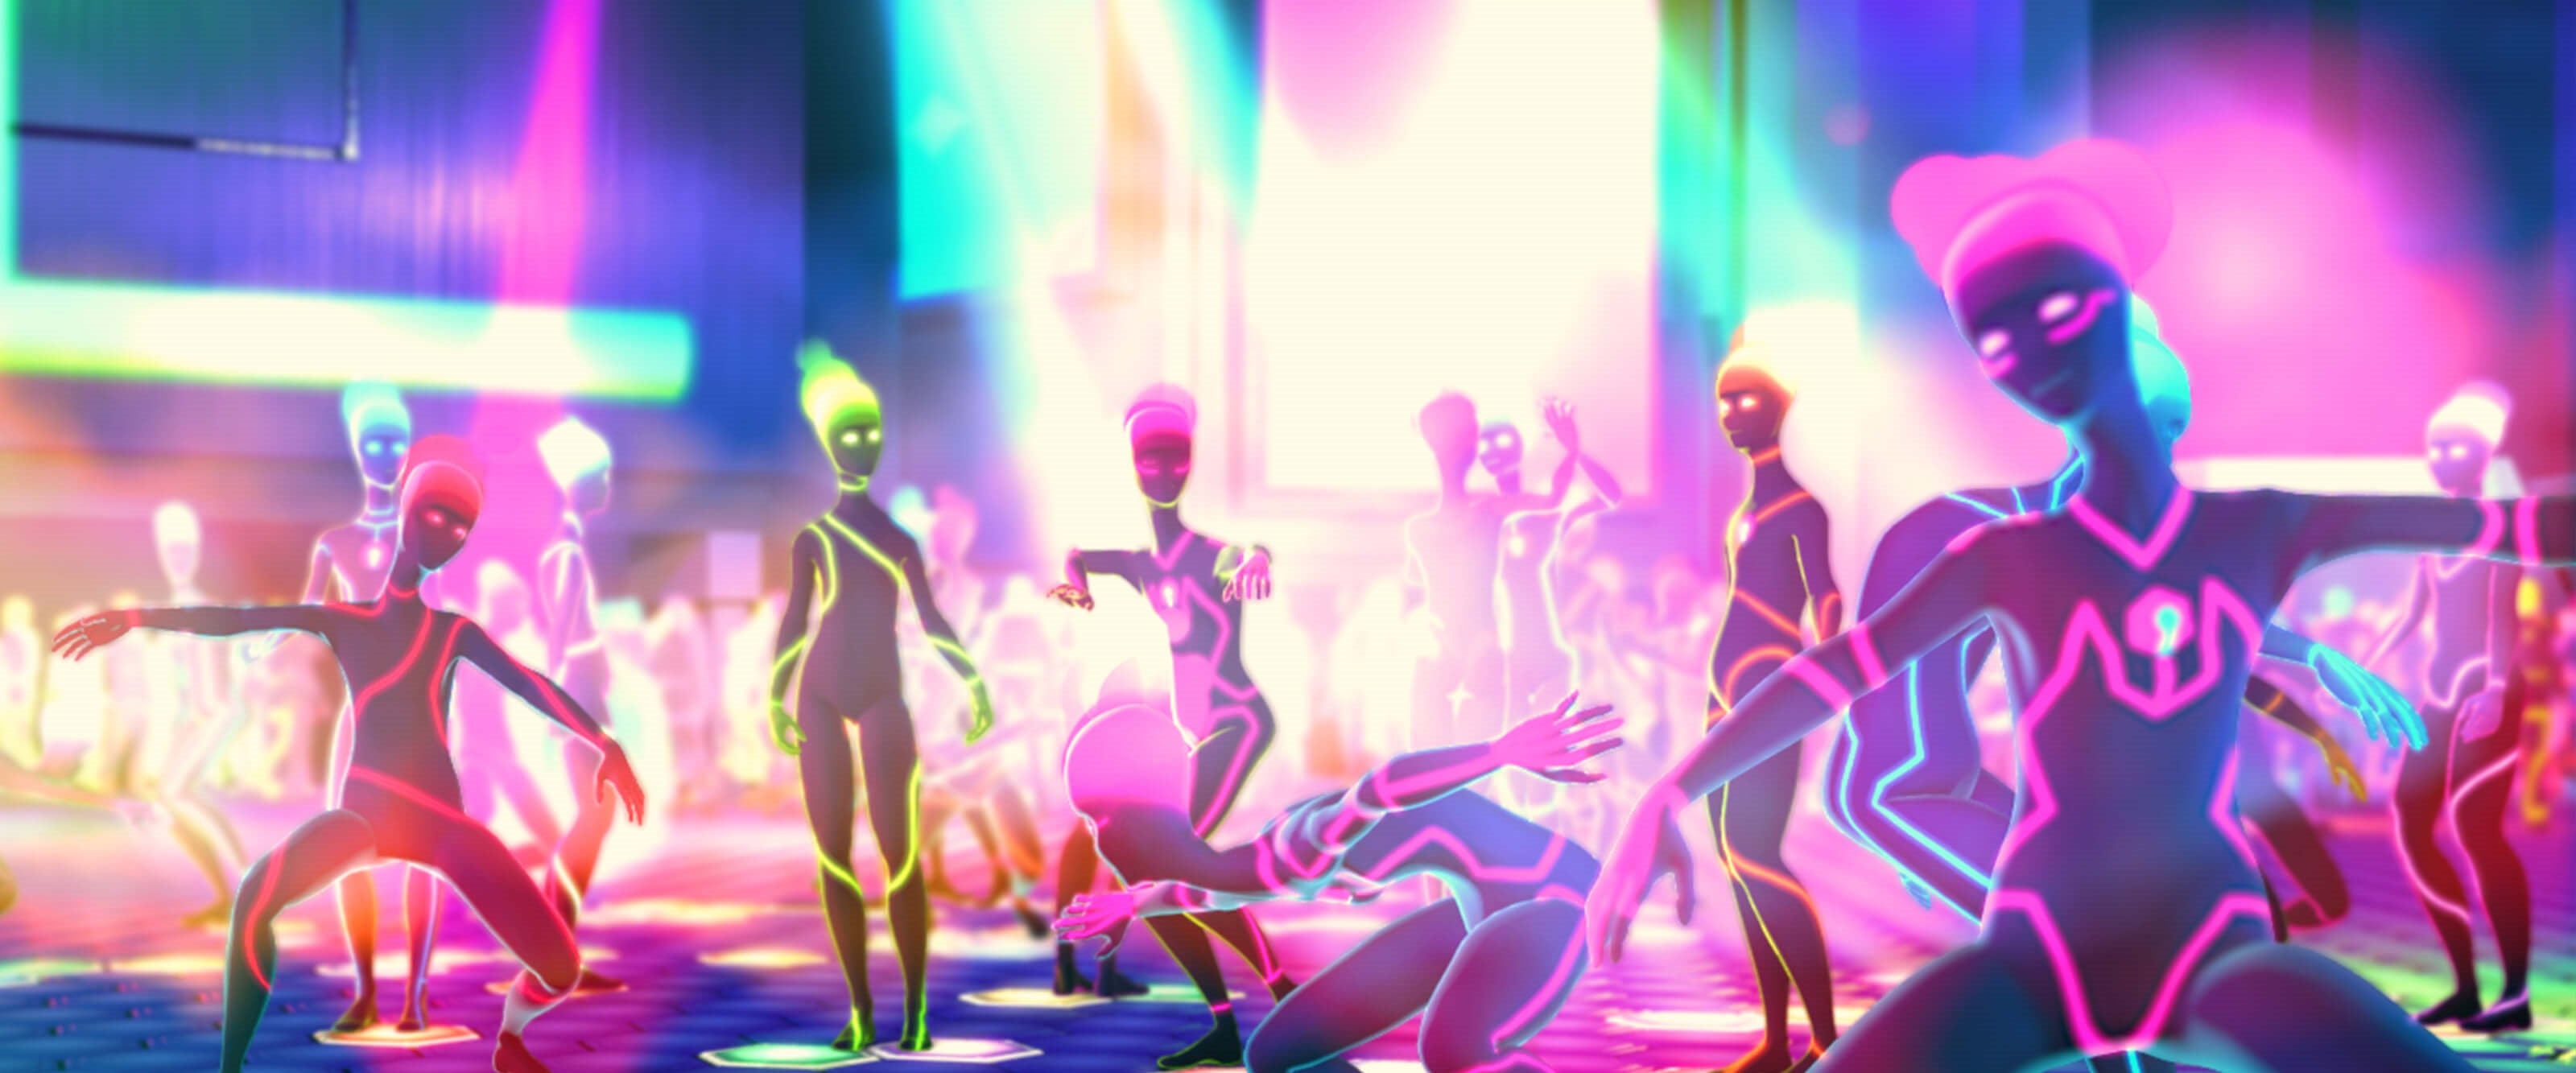 Humanoid figures move and dance in a nightclub suffused with neon colors